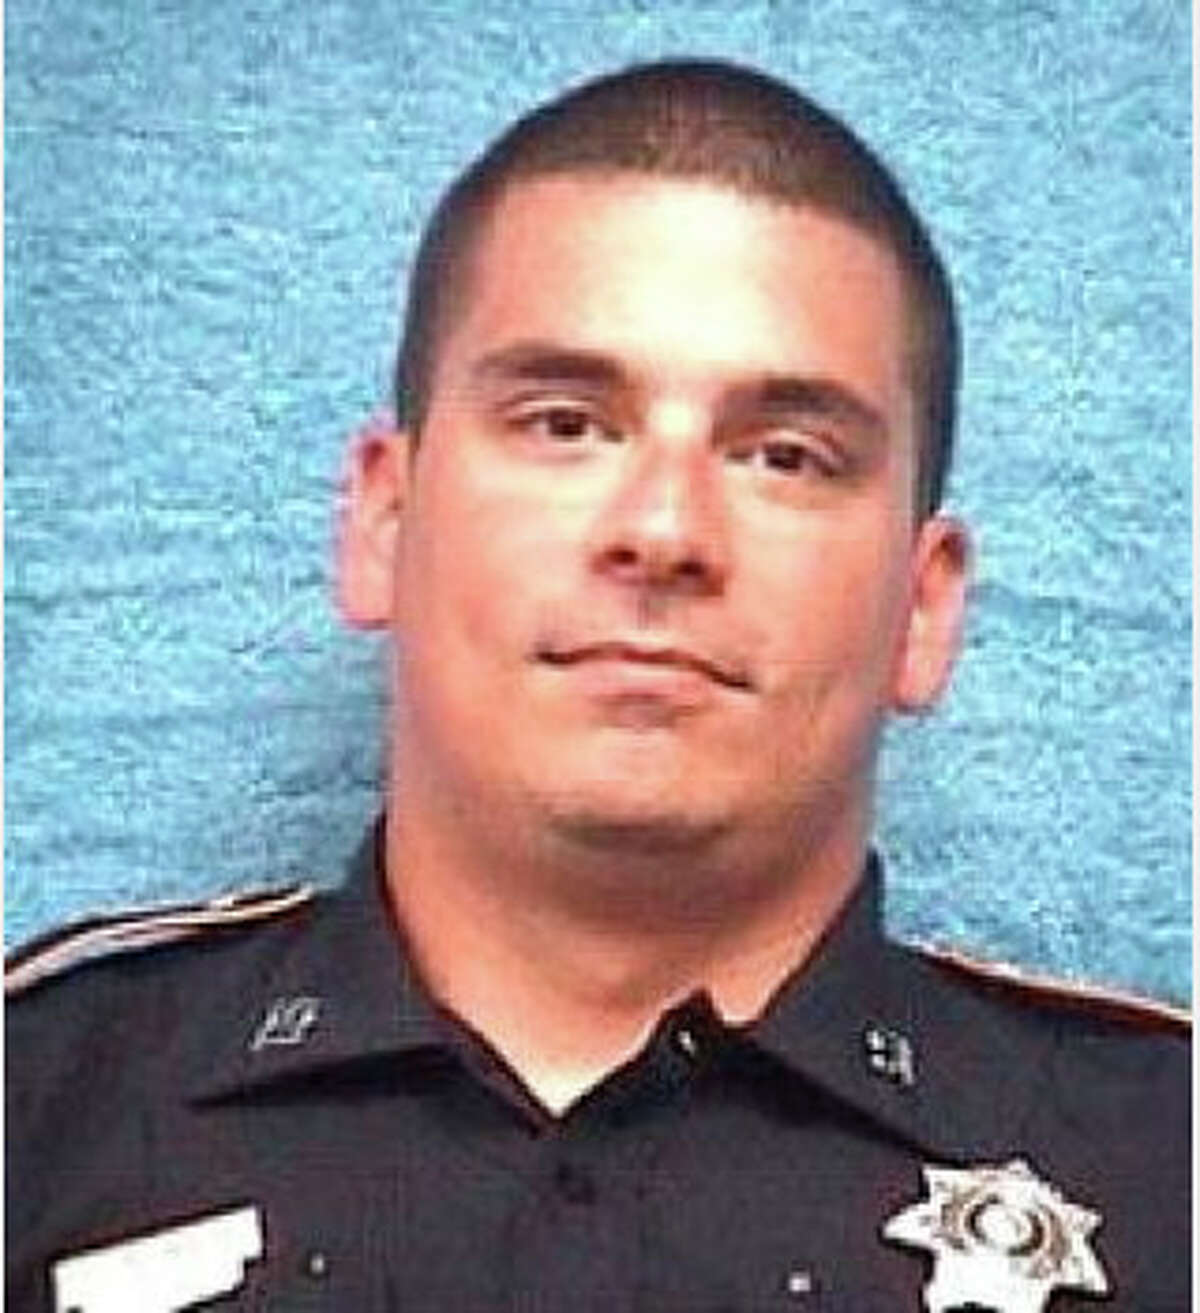 Harris County Sheriff's Deputy Jesse Valdez III, 32, is the 40th employee to die in the line of duty in the 177-year history of the agency.